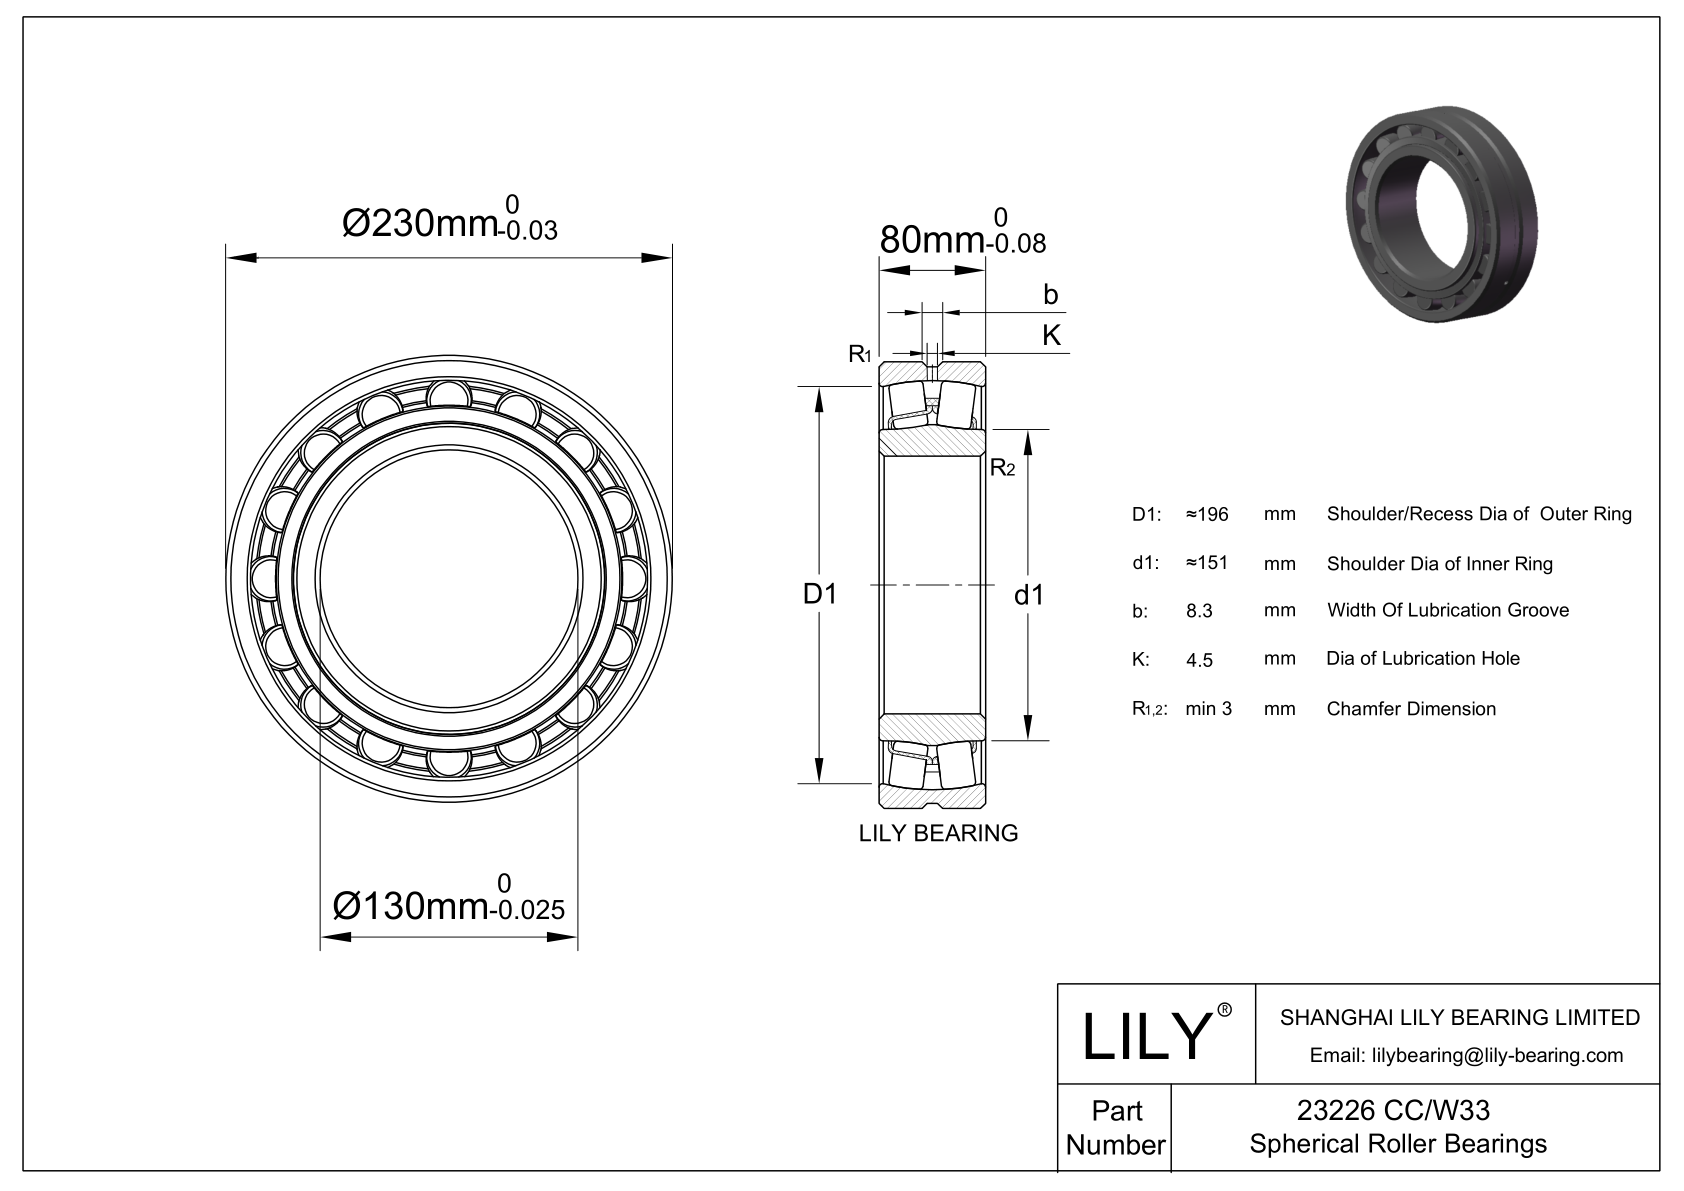 23226 CC/W33 Double Row Spherical Roller Bearing cad drawing